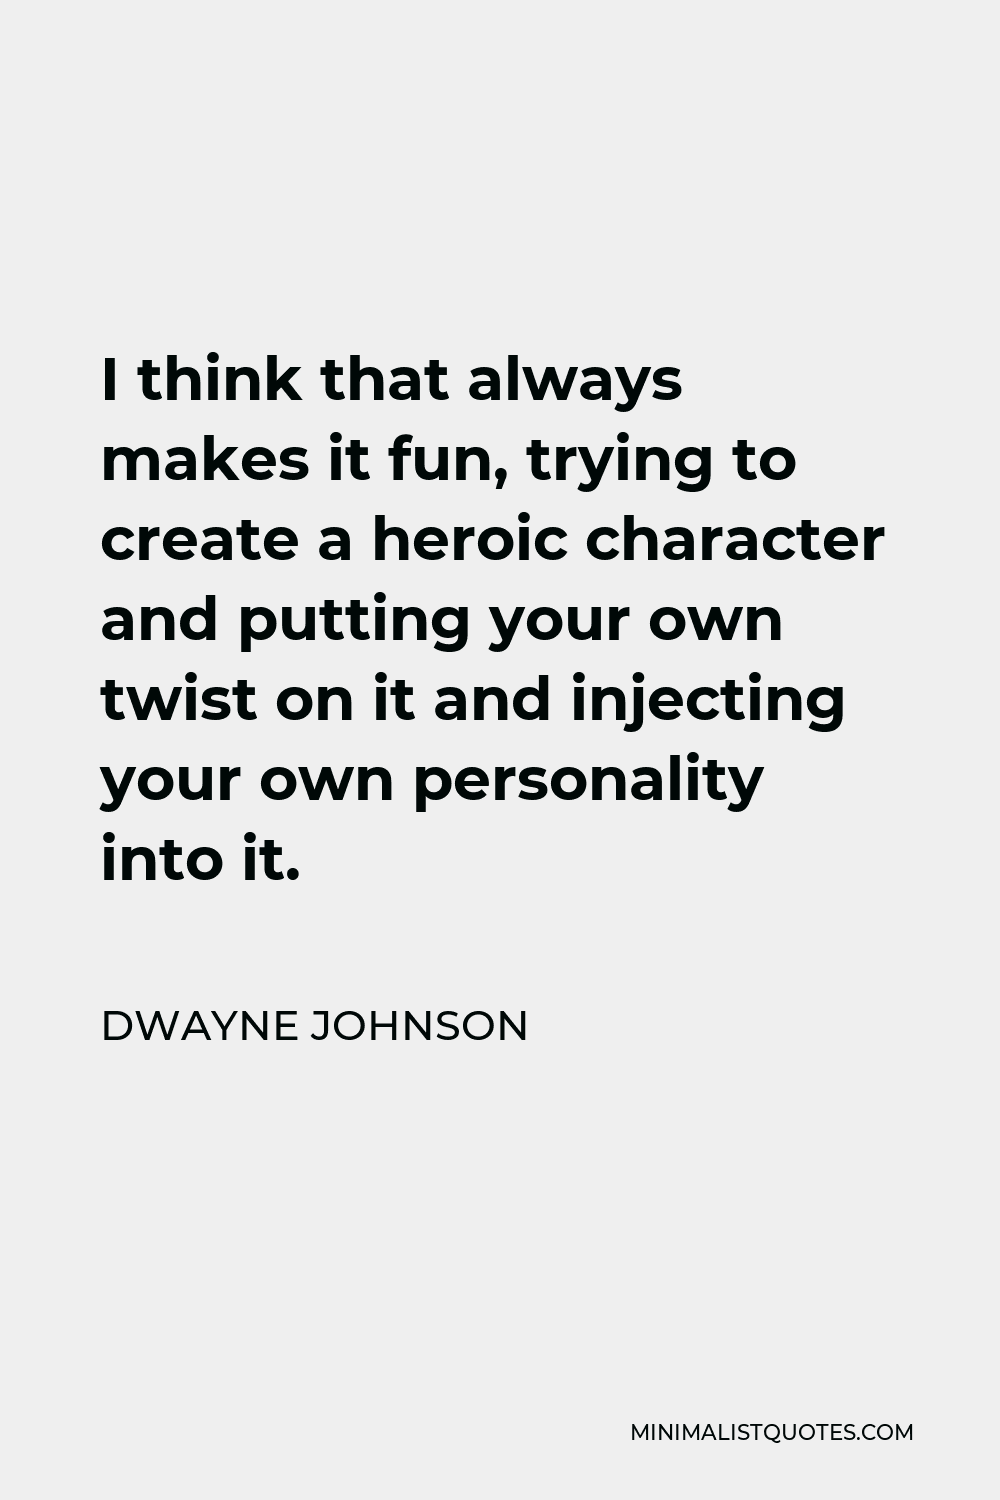 Dwayne Johnson Quote - I think that always makes it fun, trying to create a heroic character and putting your own twist on it and injecting your own personality into it.